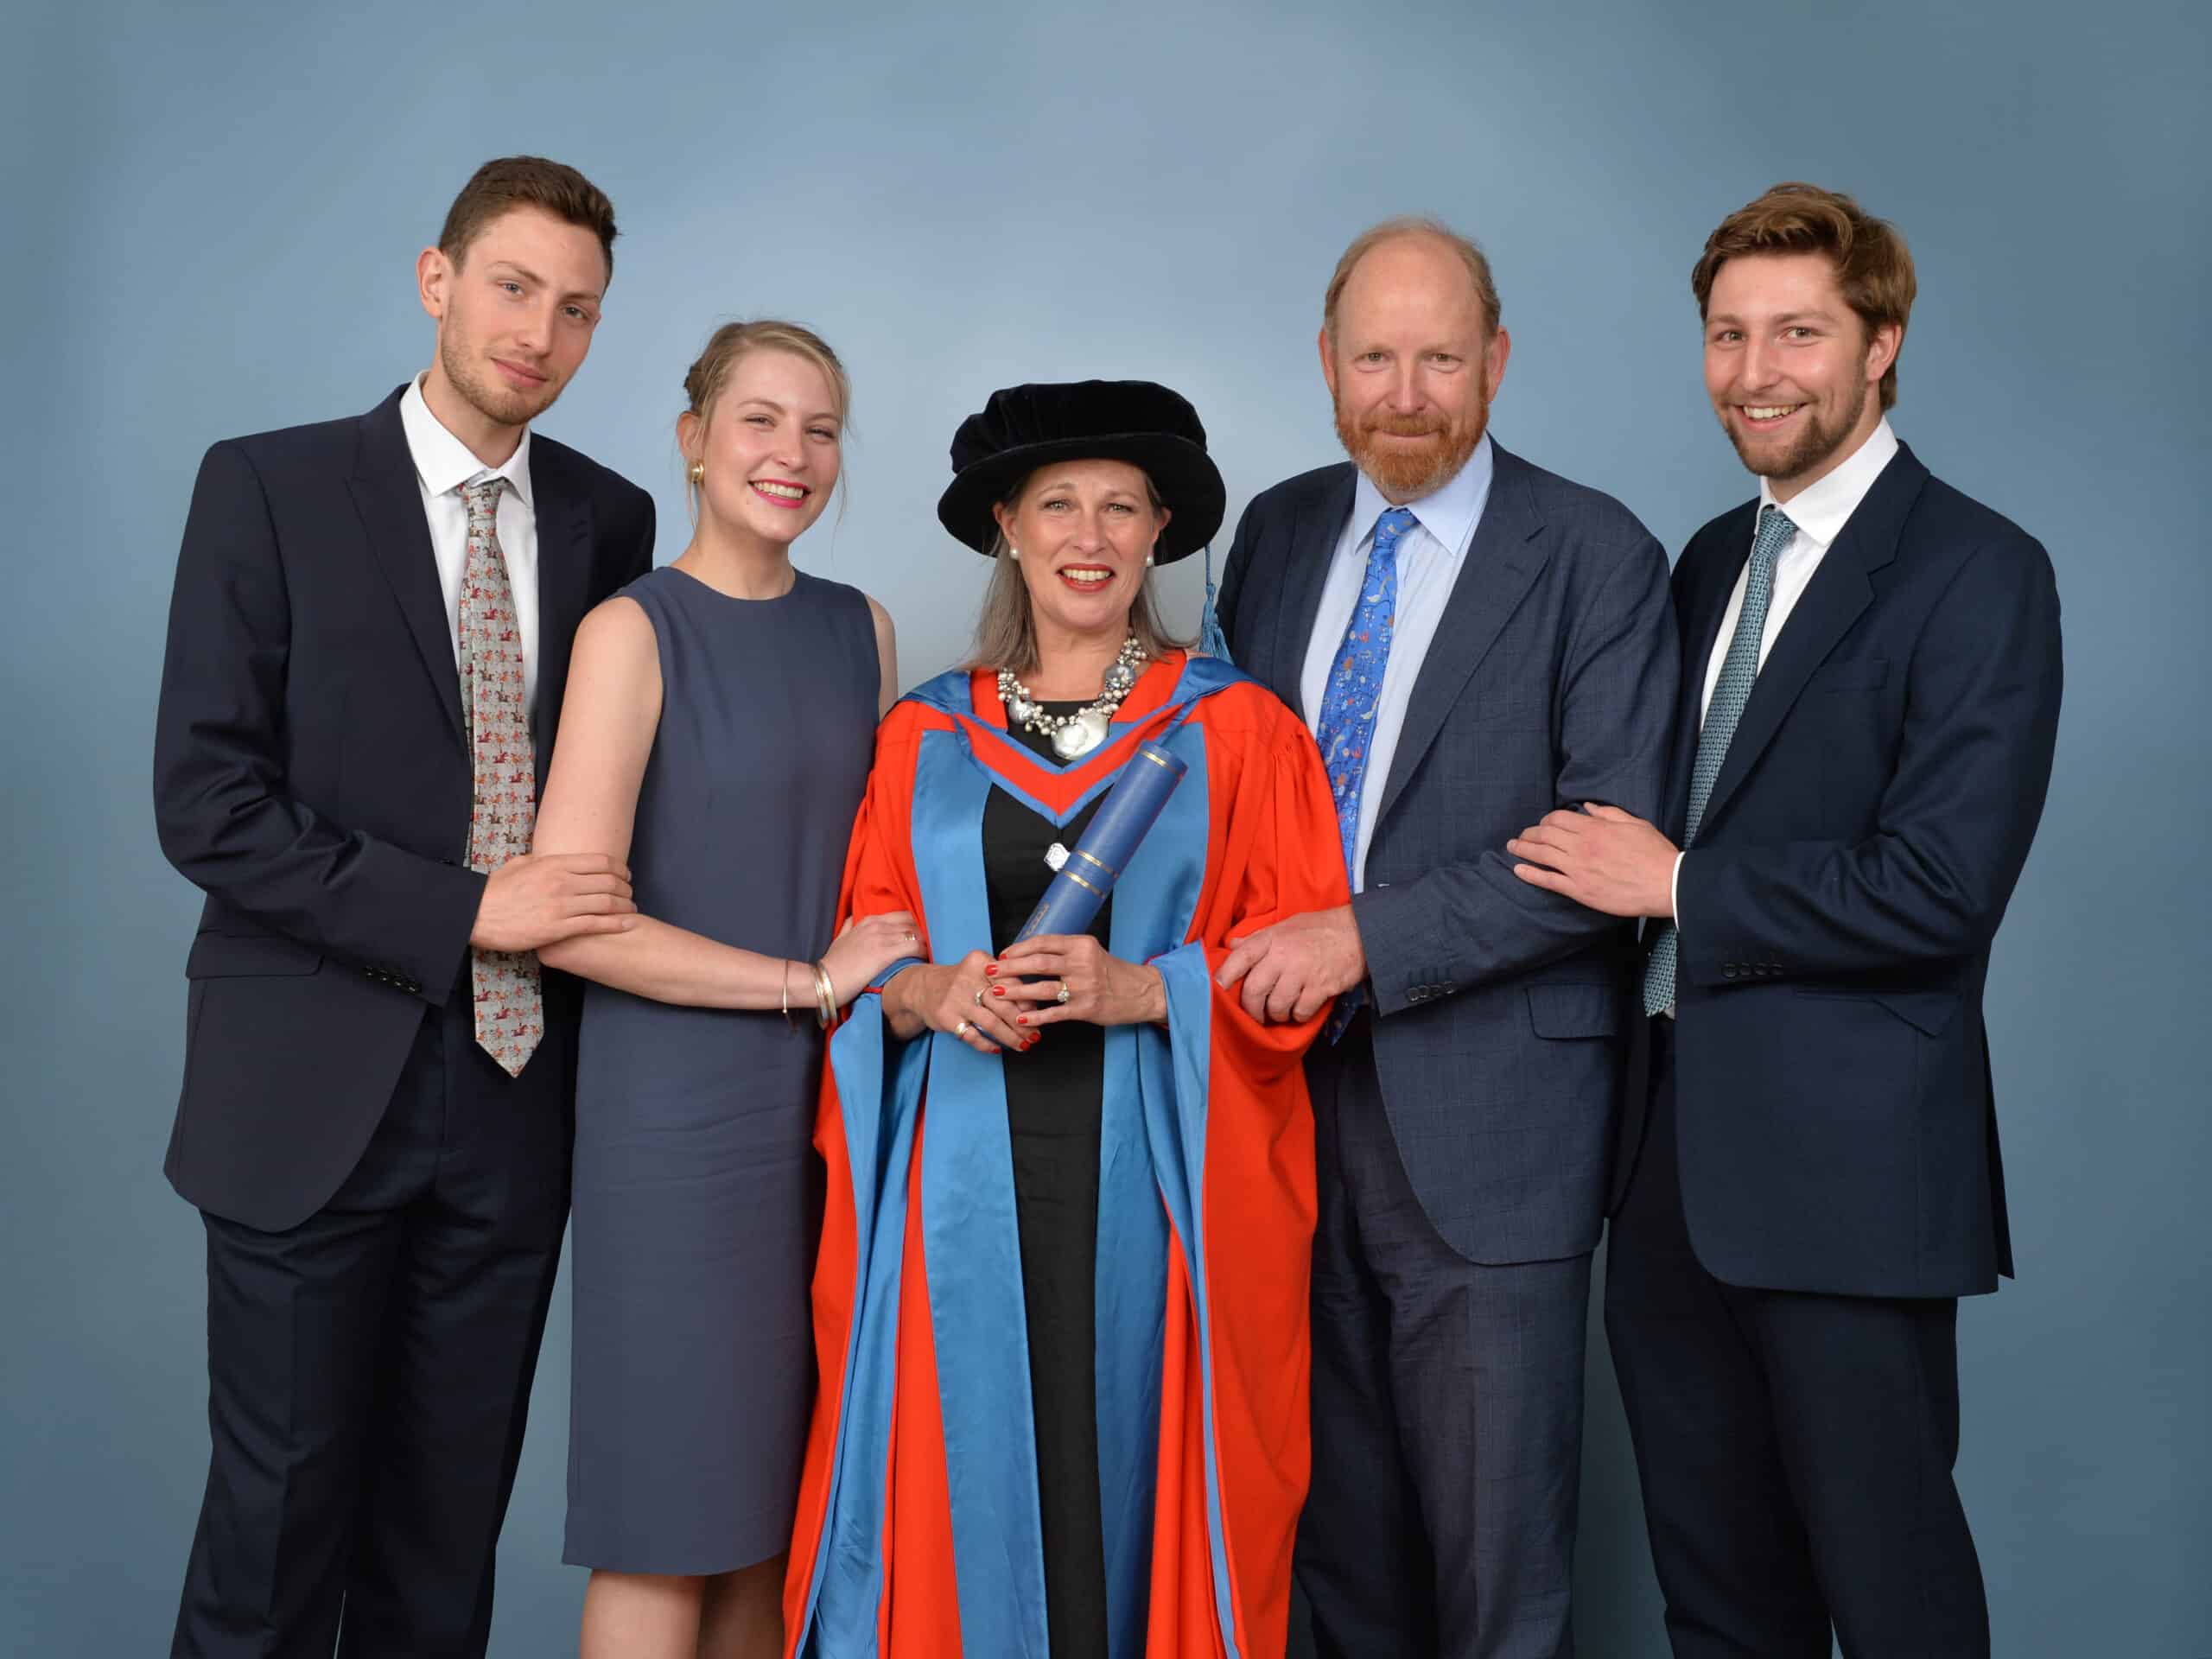 Photo of Lucy Studholme dressed in a graduation gown and hat, holding a diploma, with four family members